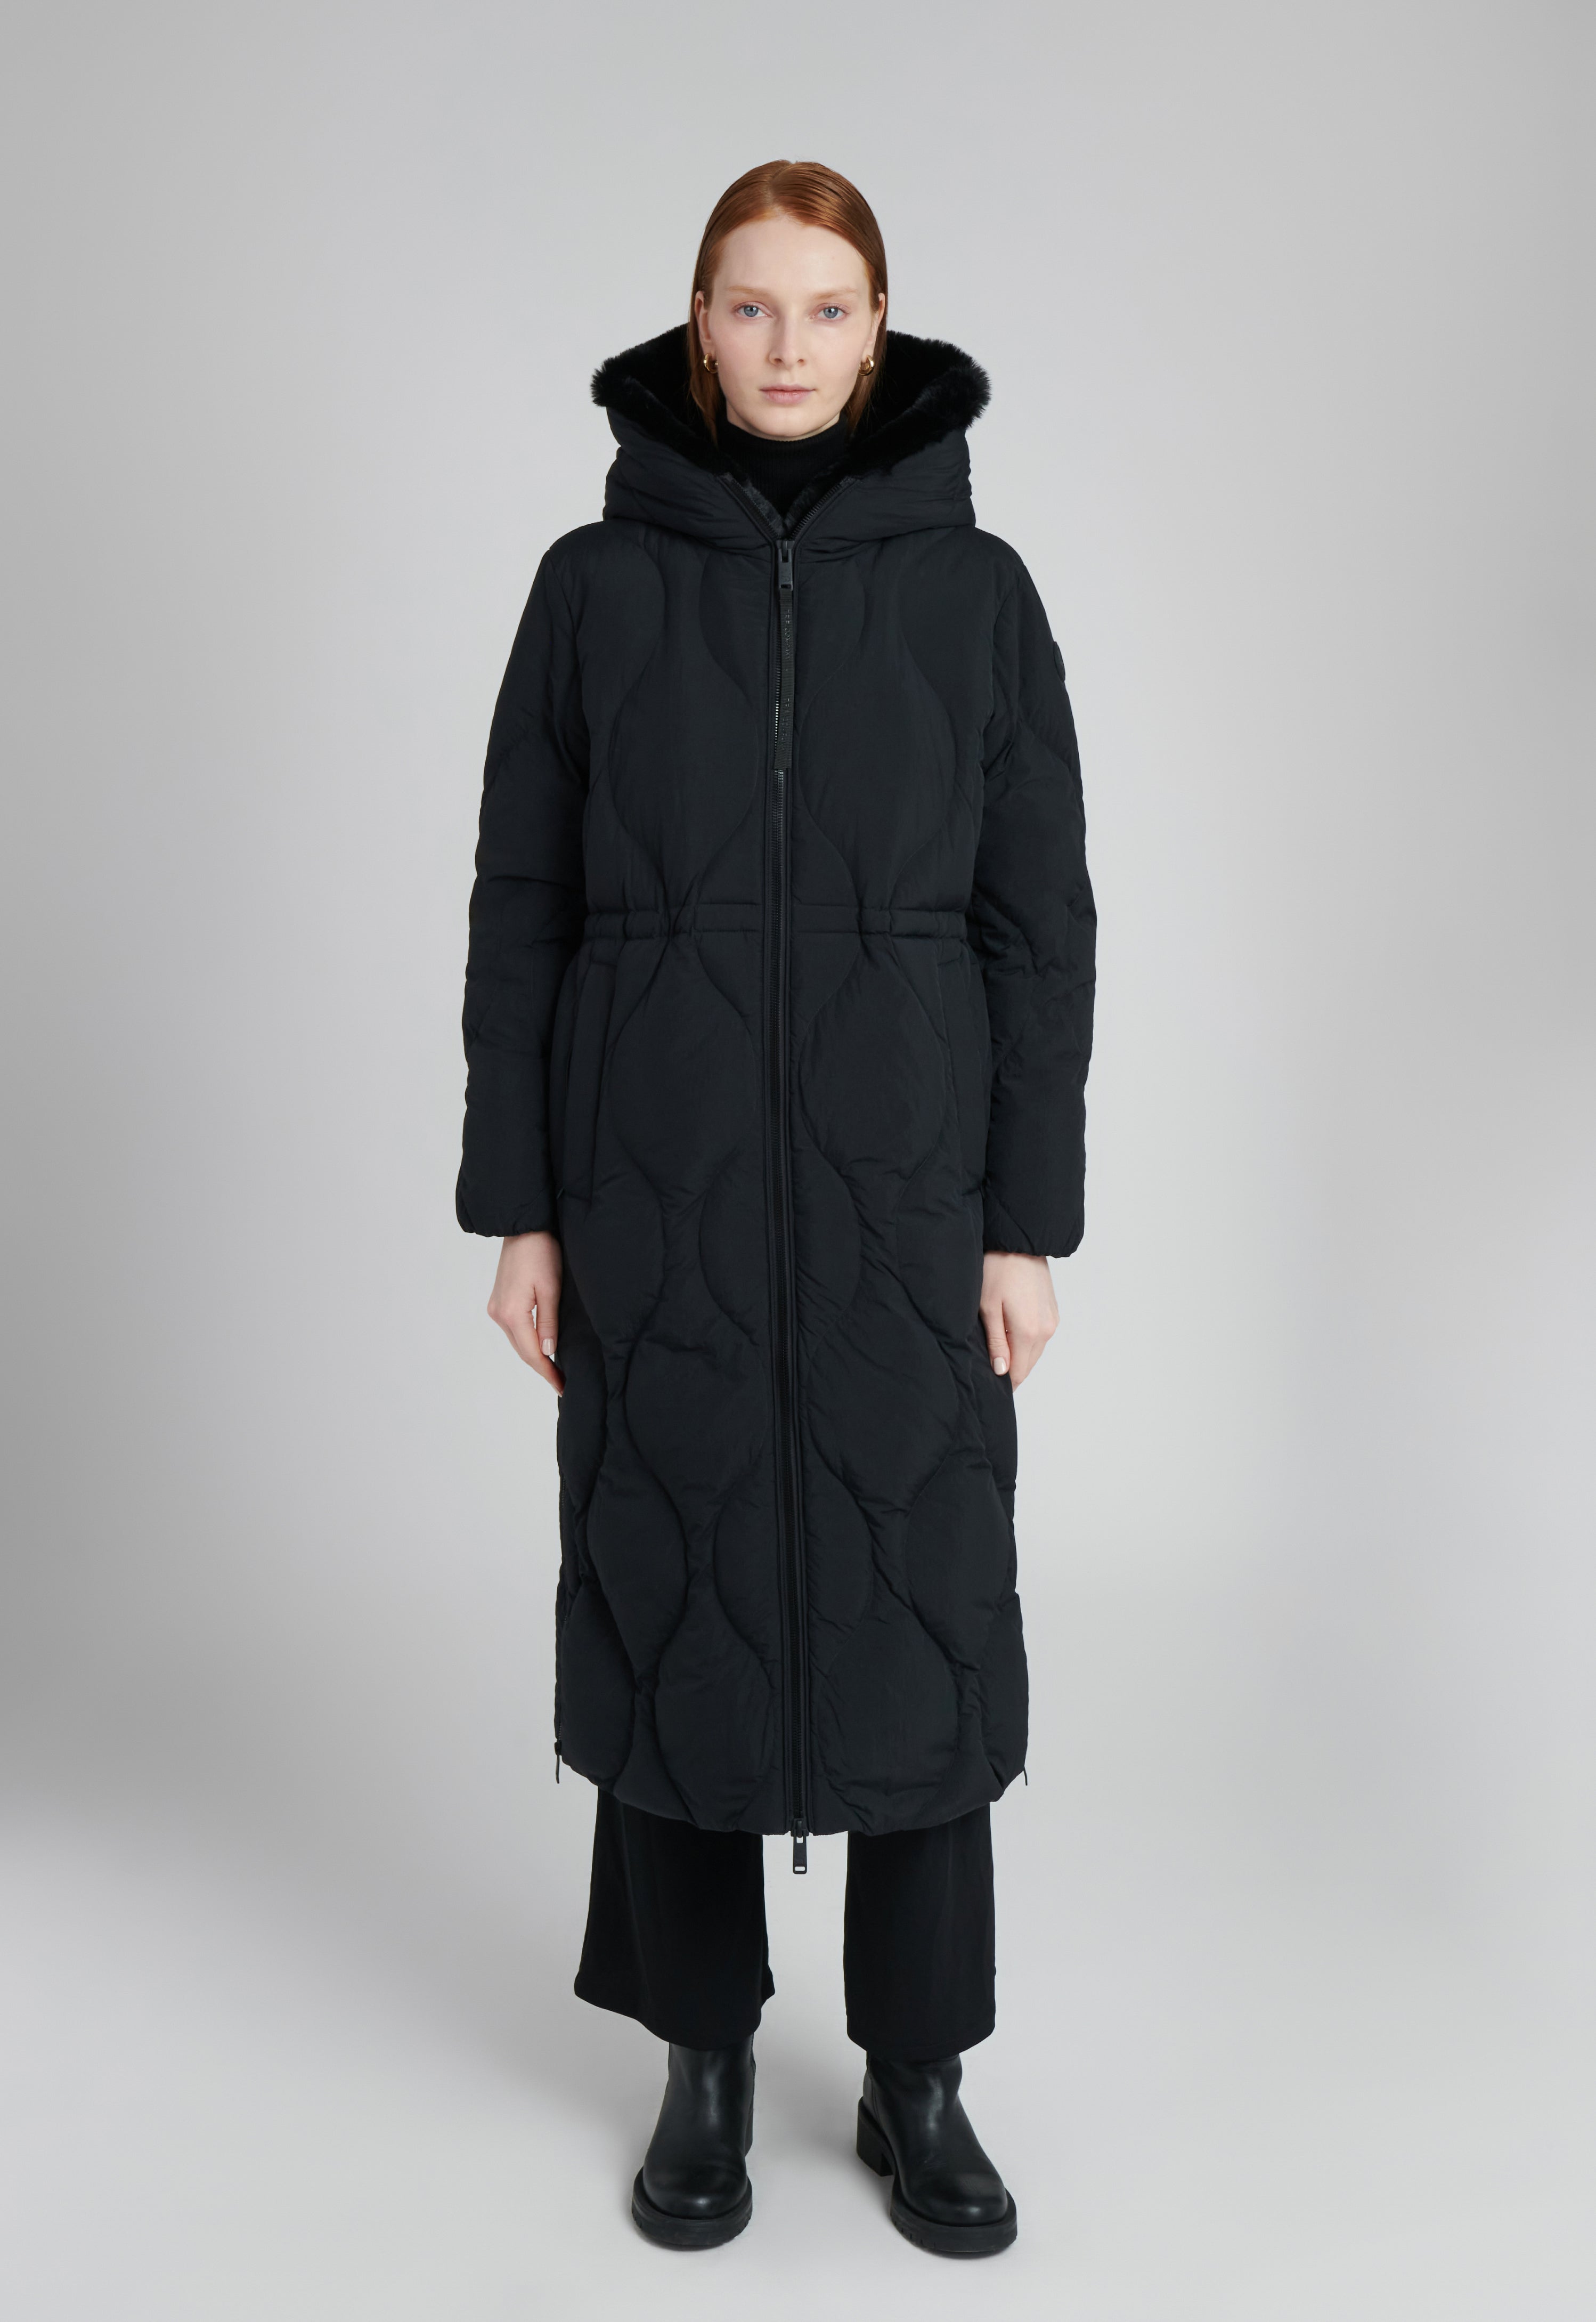 Kir | Women's Quilted Maxi Coat for Winter | The Recycled Planet